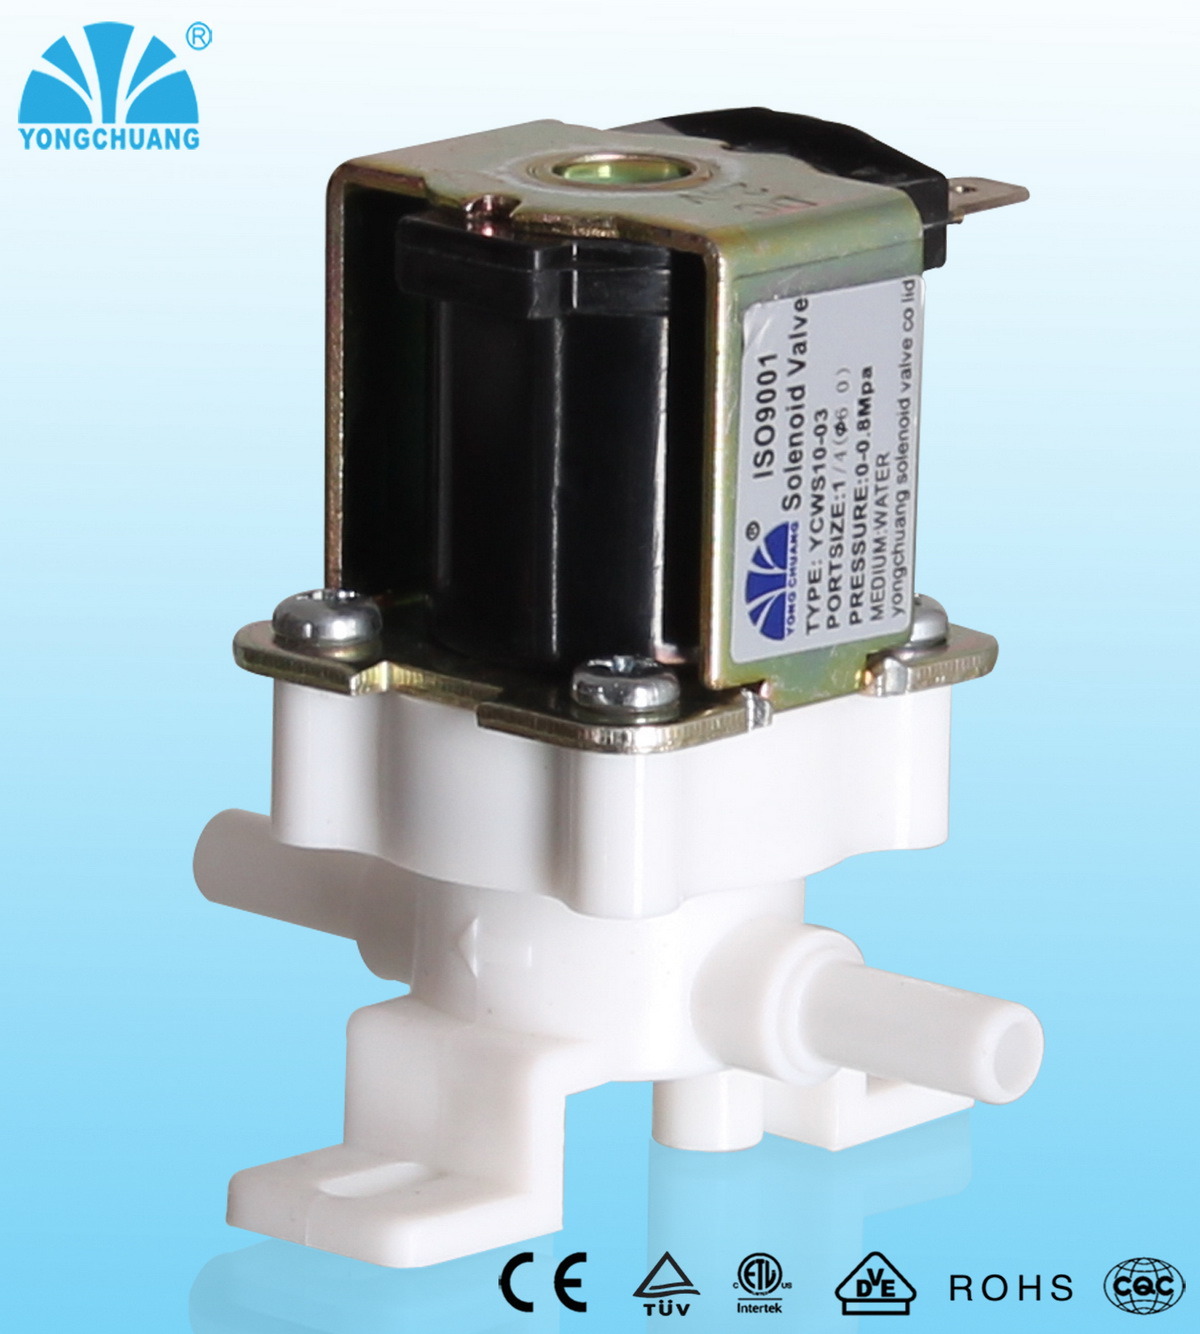 Plastic Reliabale Quality Solenoid Valve for Small Home Appliaces (YCWS3)